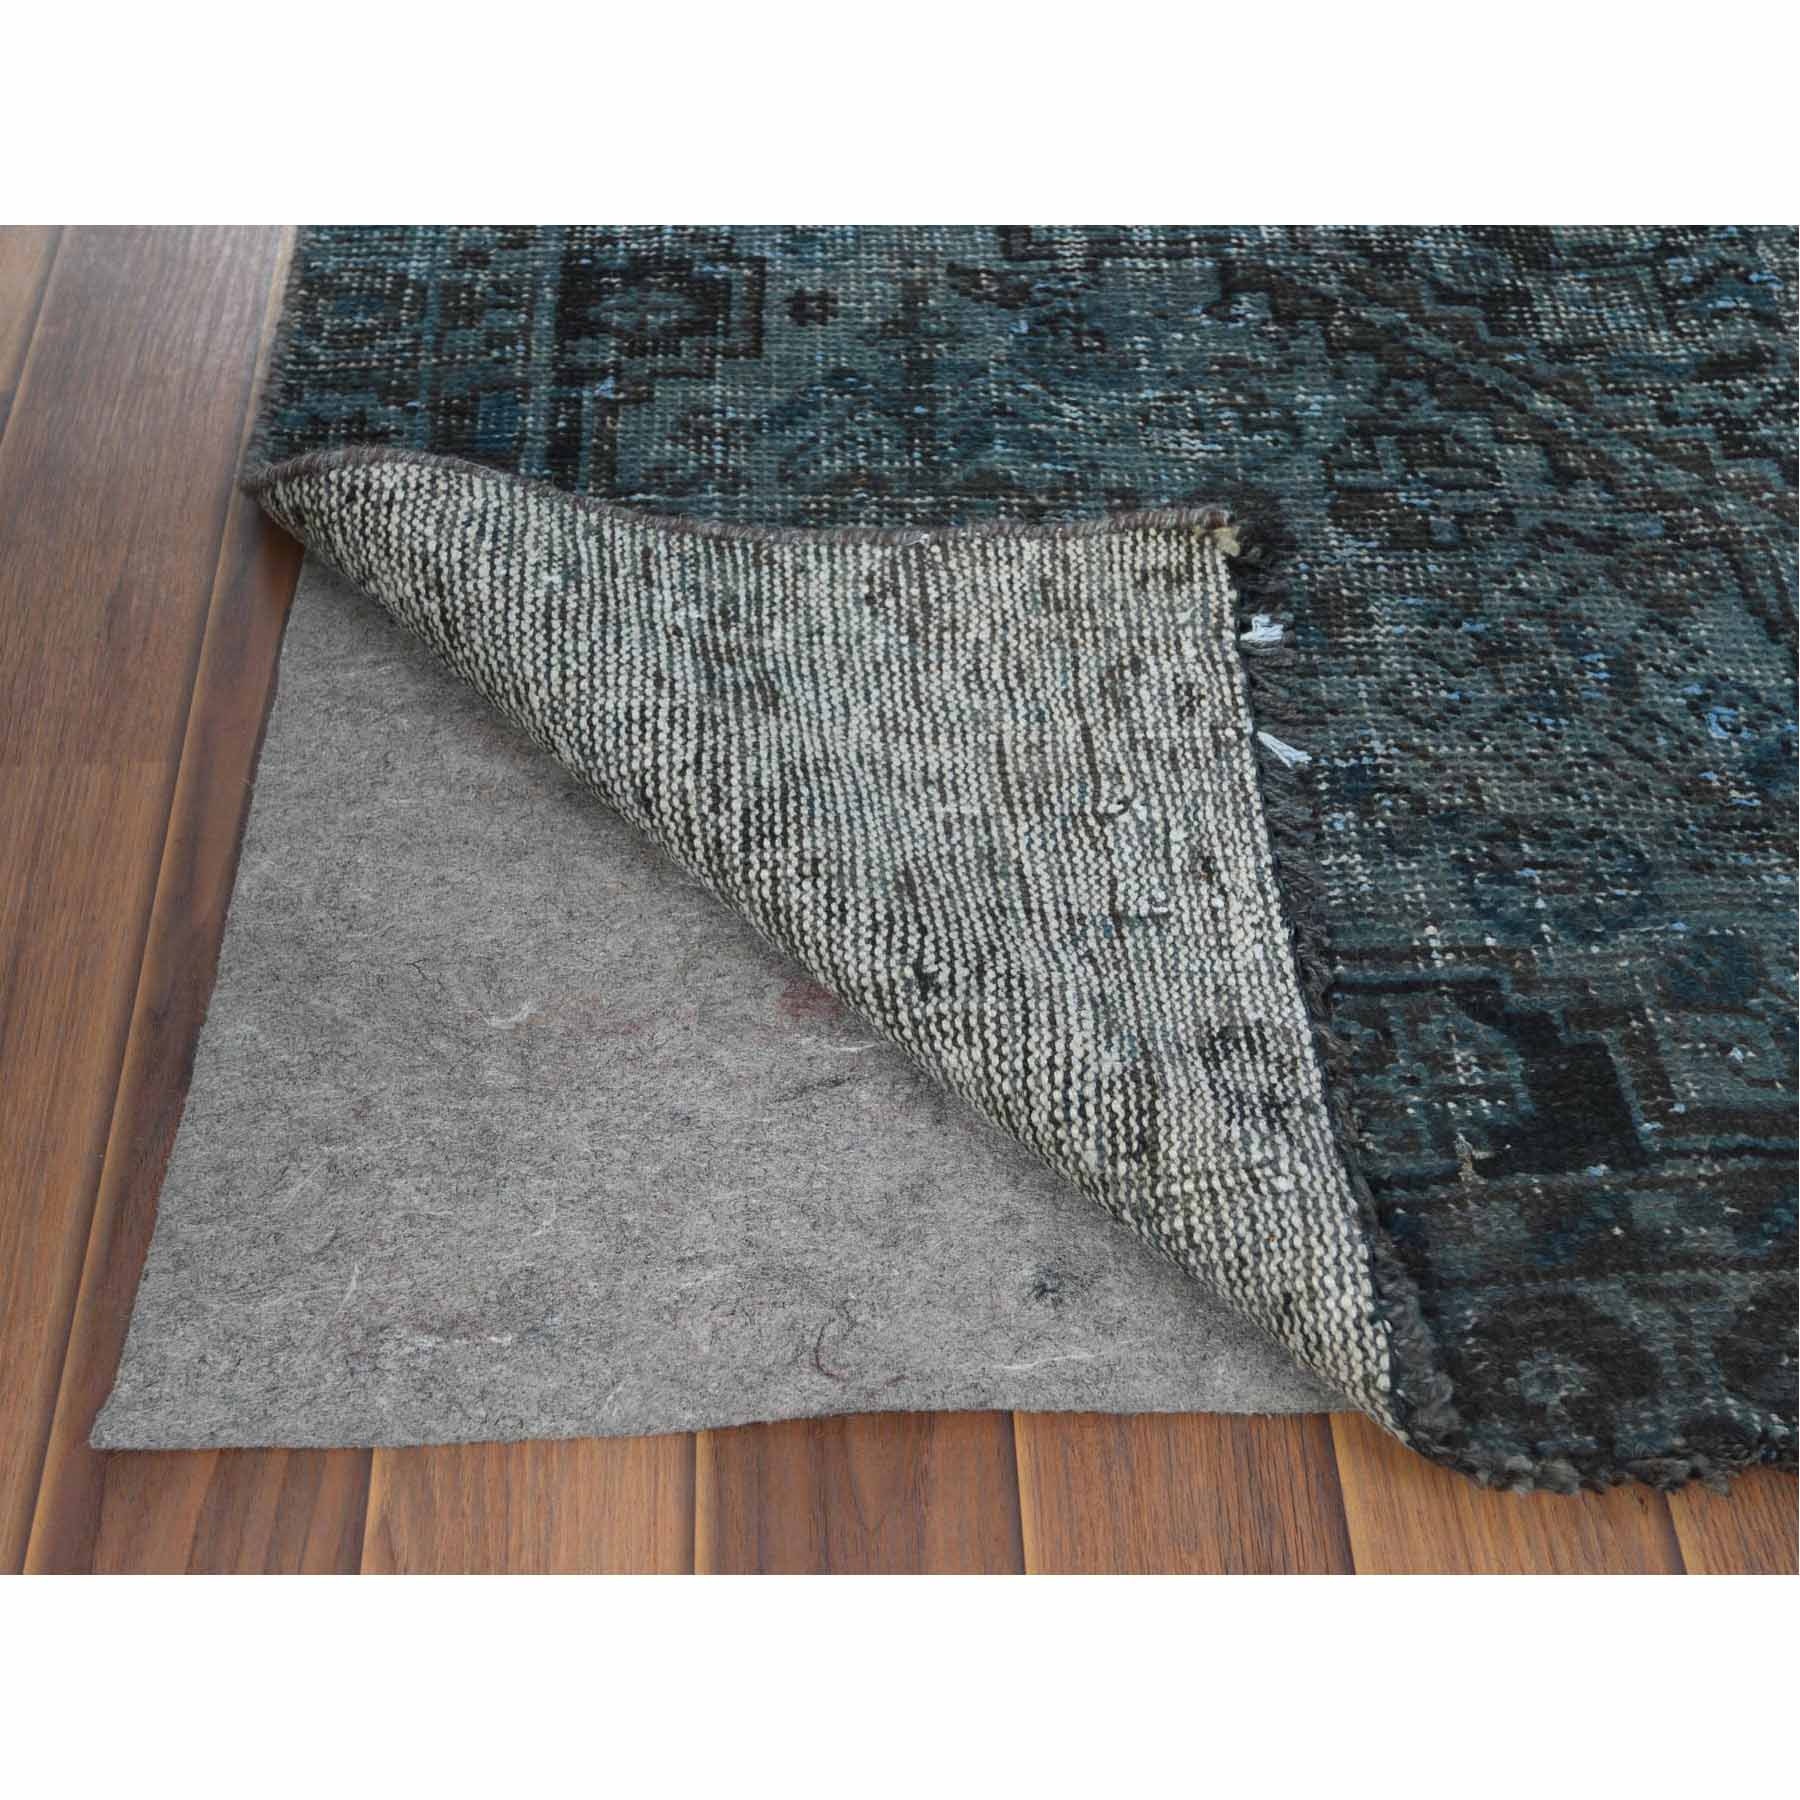 Overdyed-Vintage-Hand-Knotted-Rug-302770